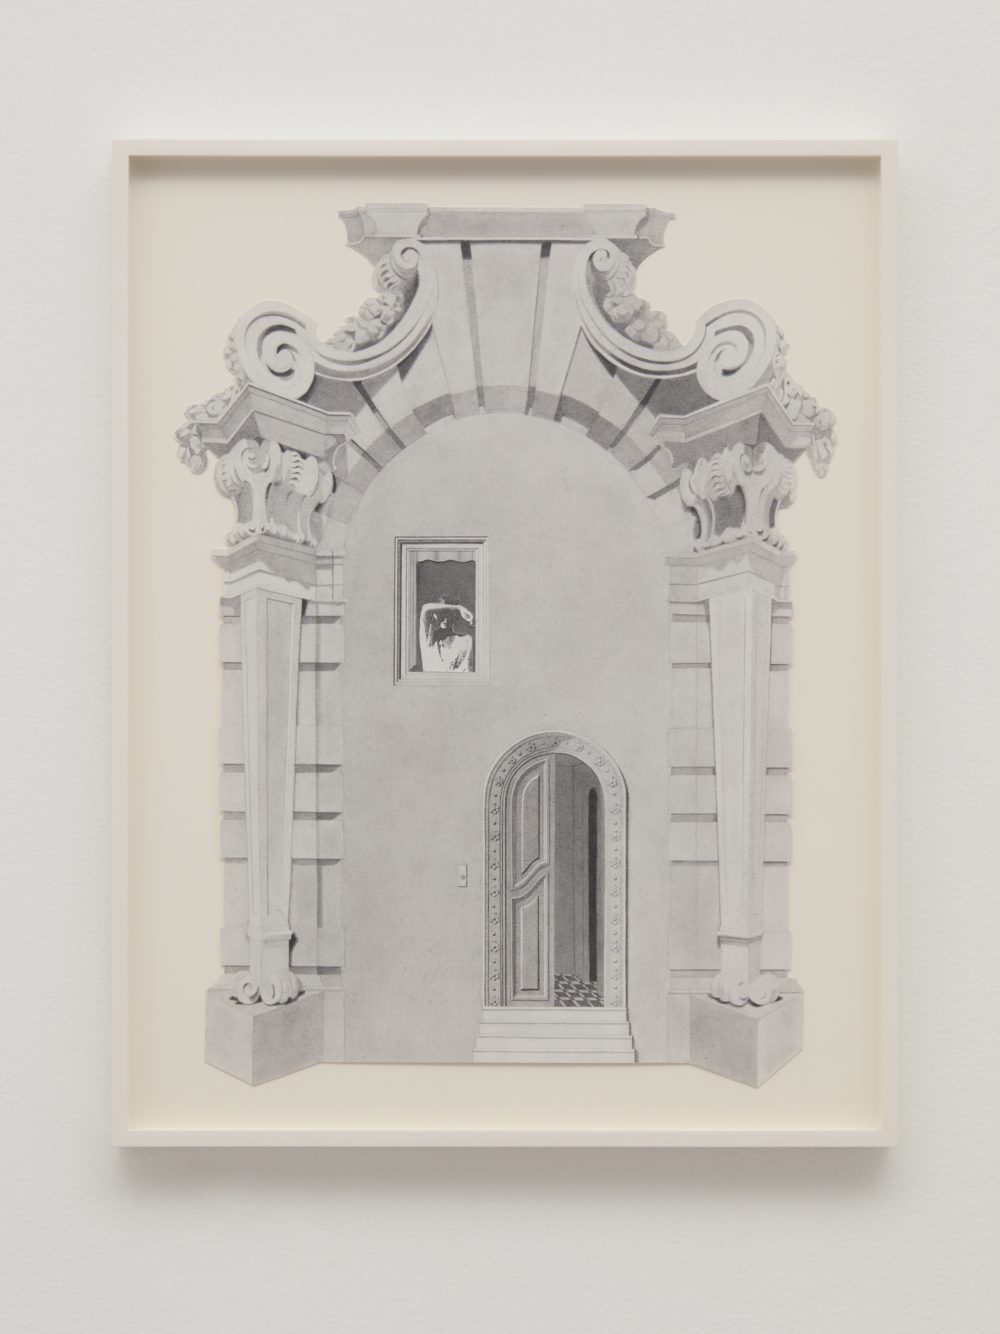 Graphite drawing of an architectural façade with a door and a window and ornate molding.